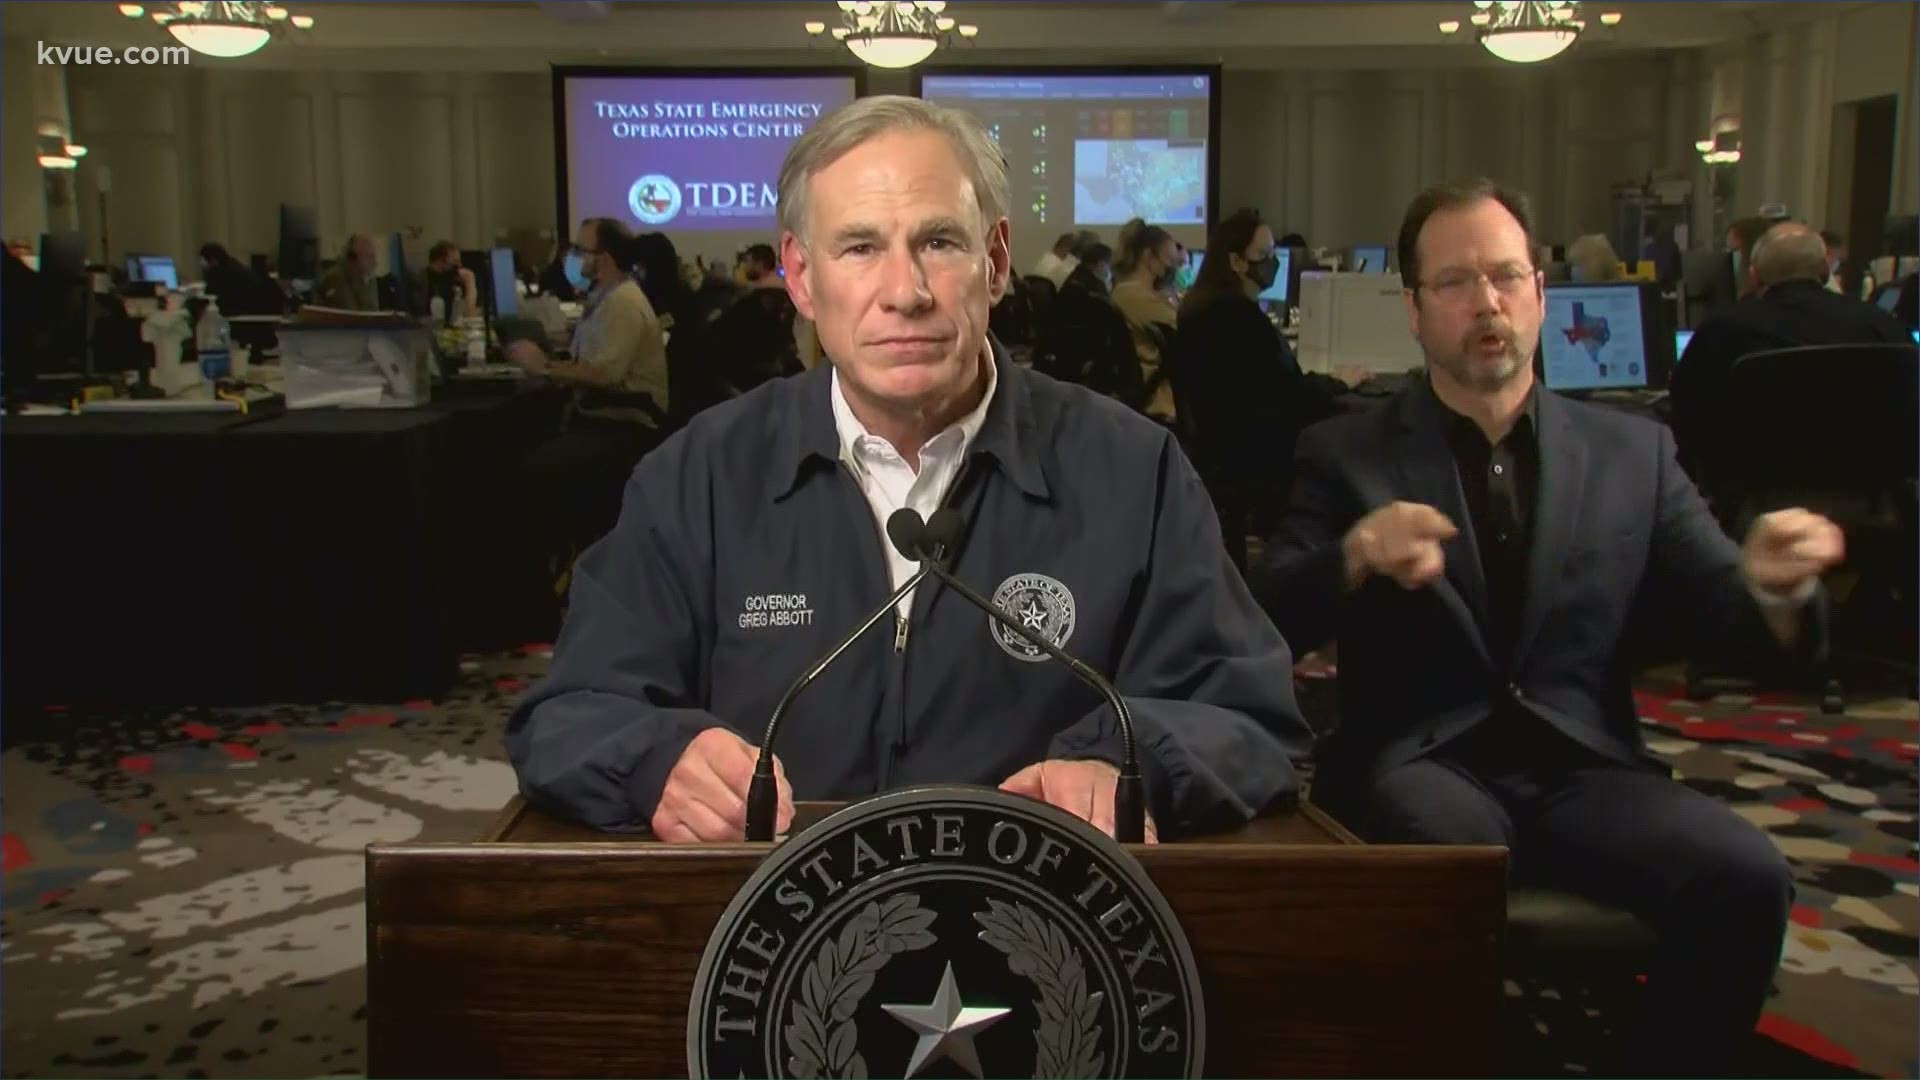 Gov. Greg Abbott has vowed action after last week's winter storms led to a power failure in Texas. He said ERCOT must be overhauled.